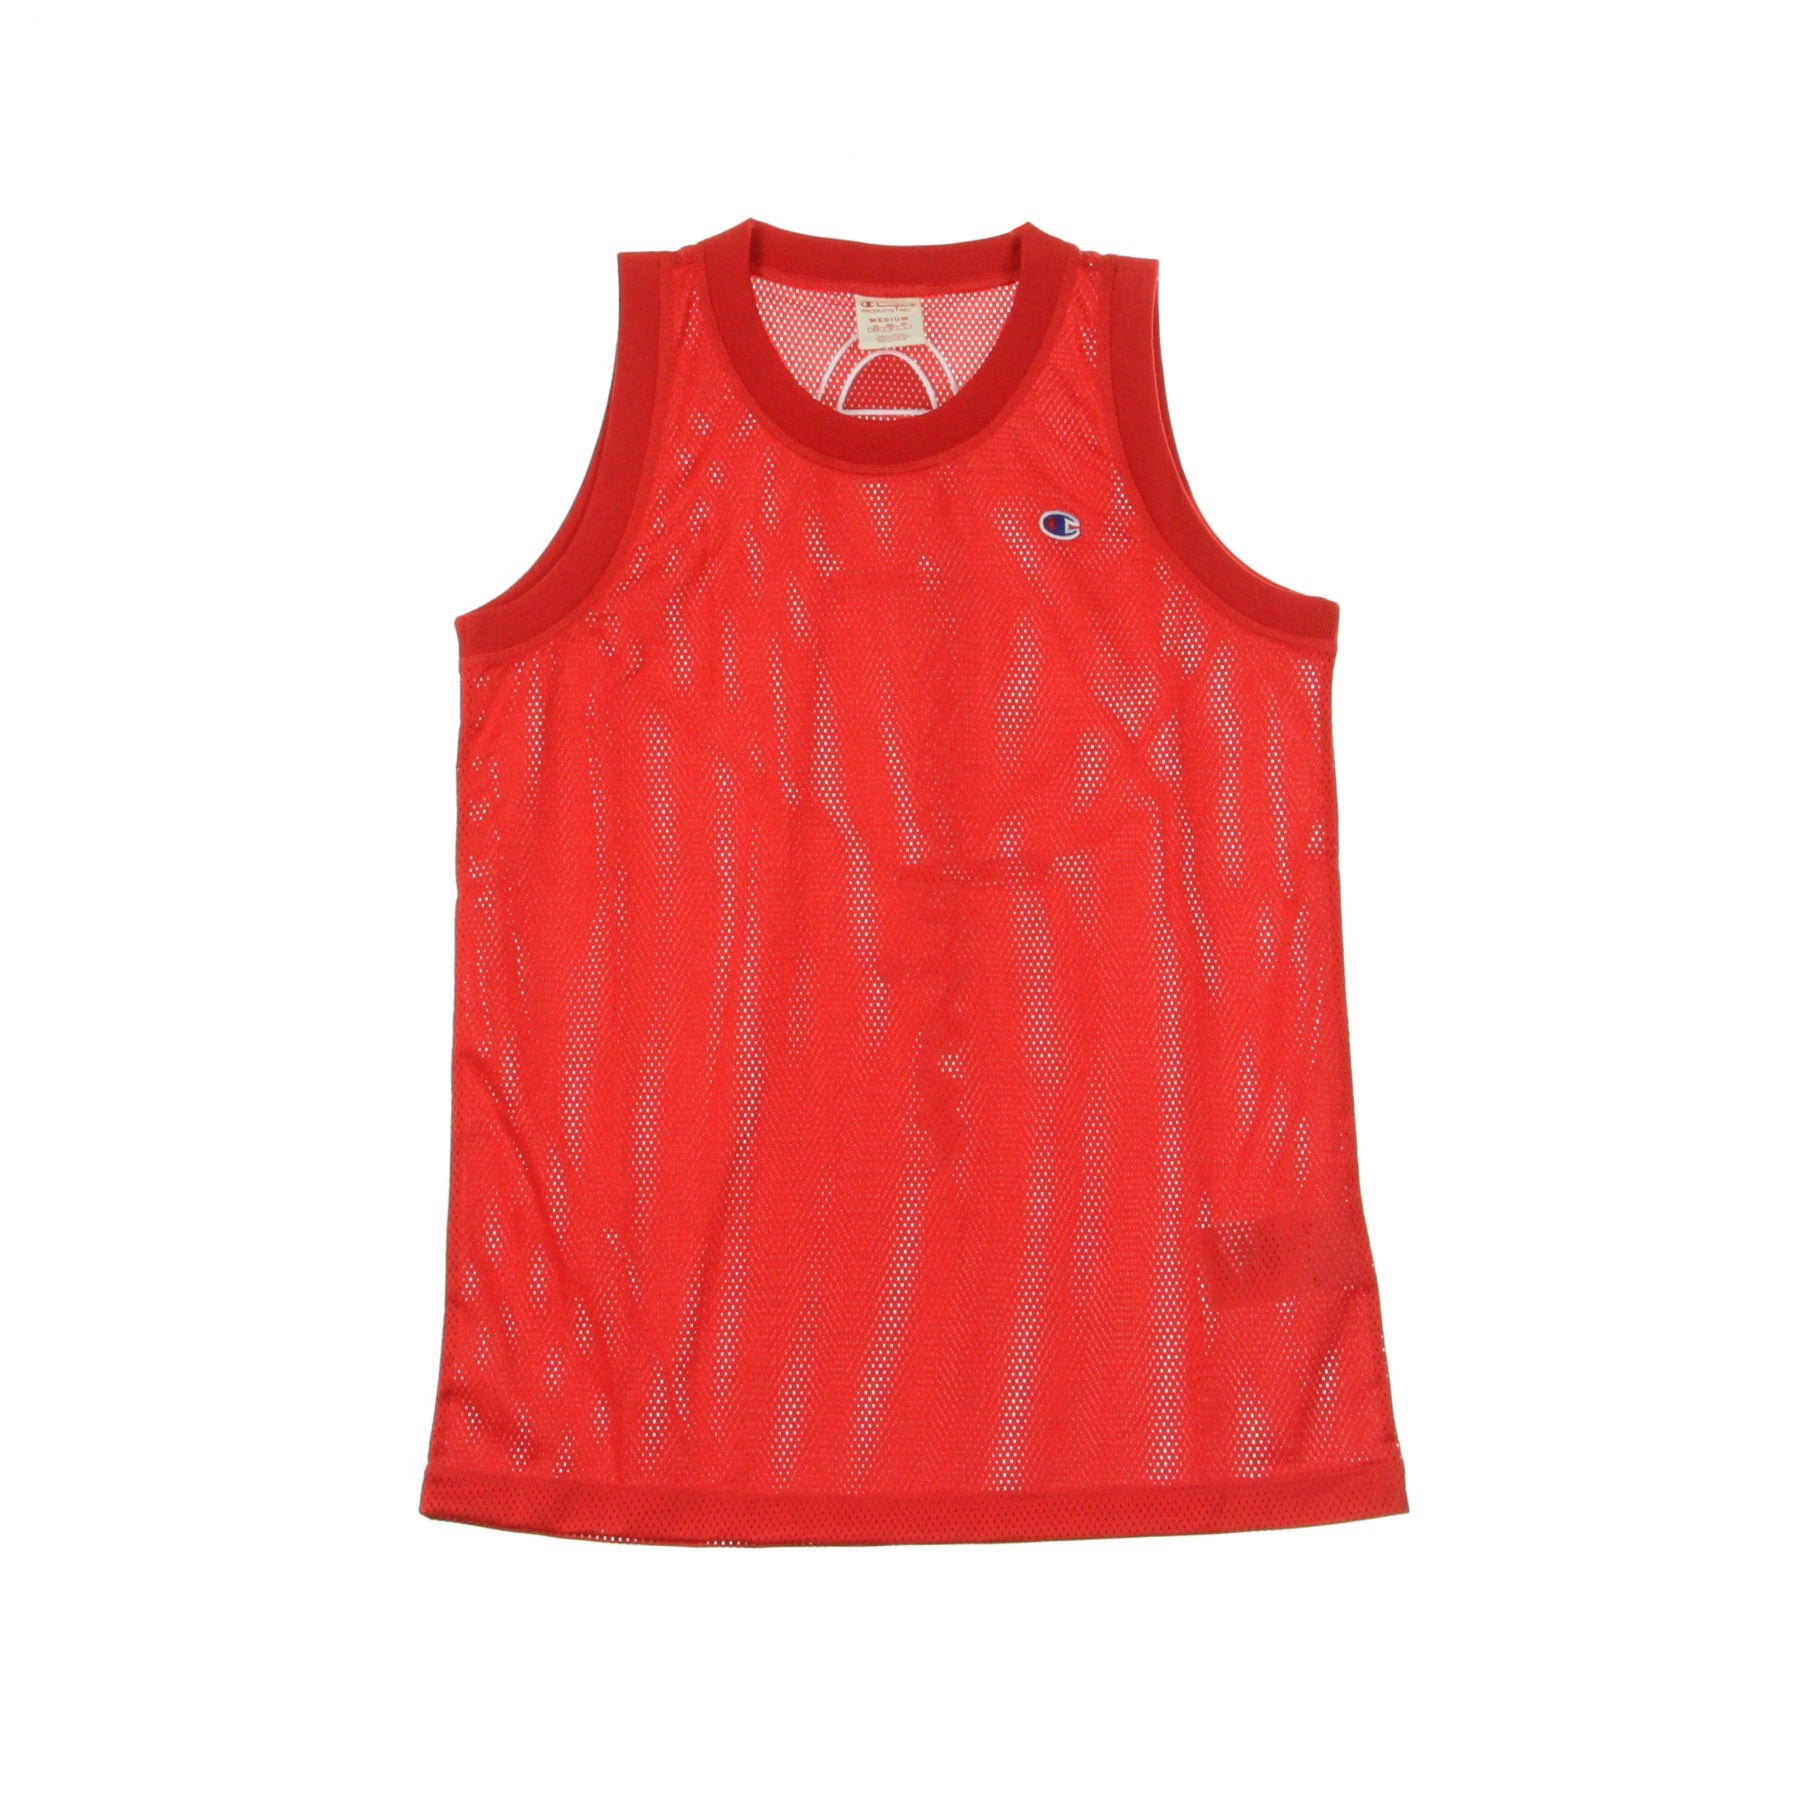 Champion, Canotta Tipo Basket Donna Tank Top, Red